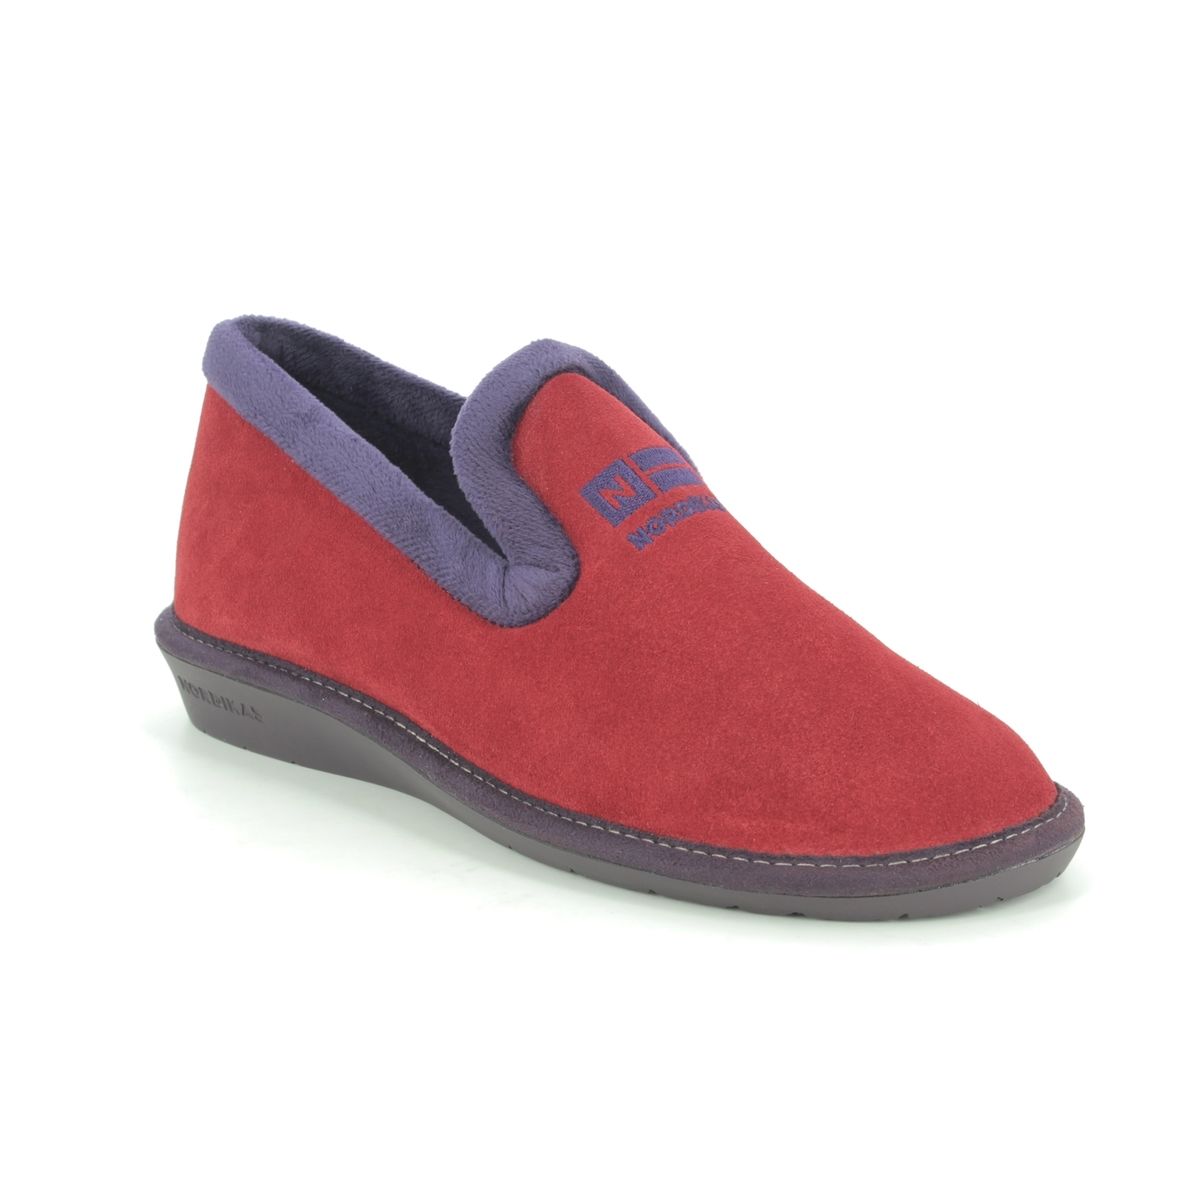 Nordikas Tabackin Red Suede Womens Slippers 305-4   Nicola 3 In Size 36 In Plain Red Suede